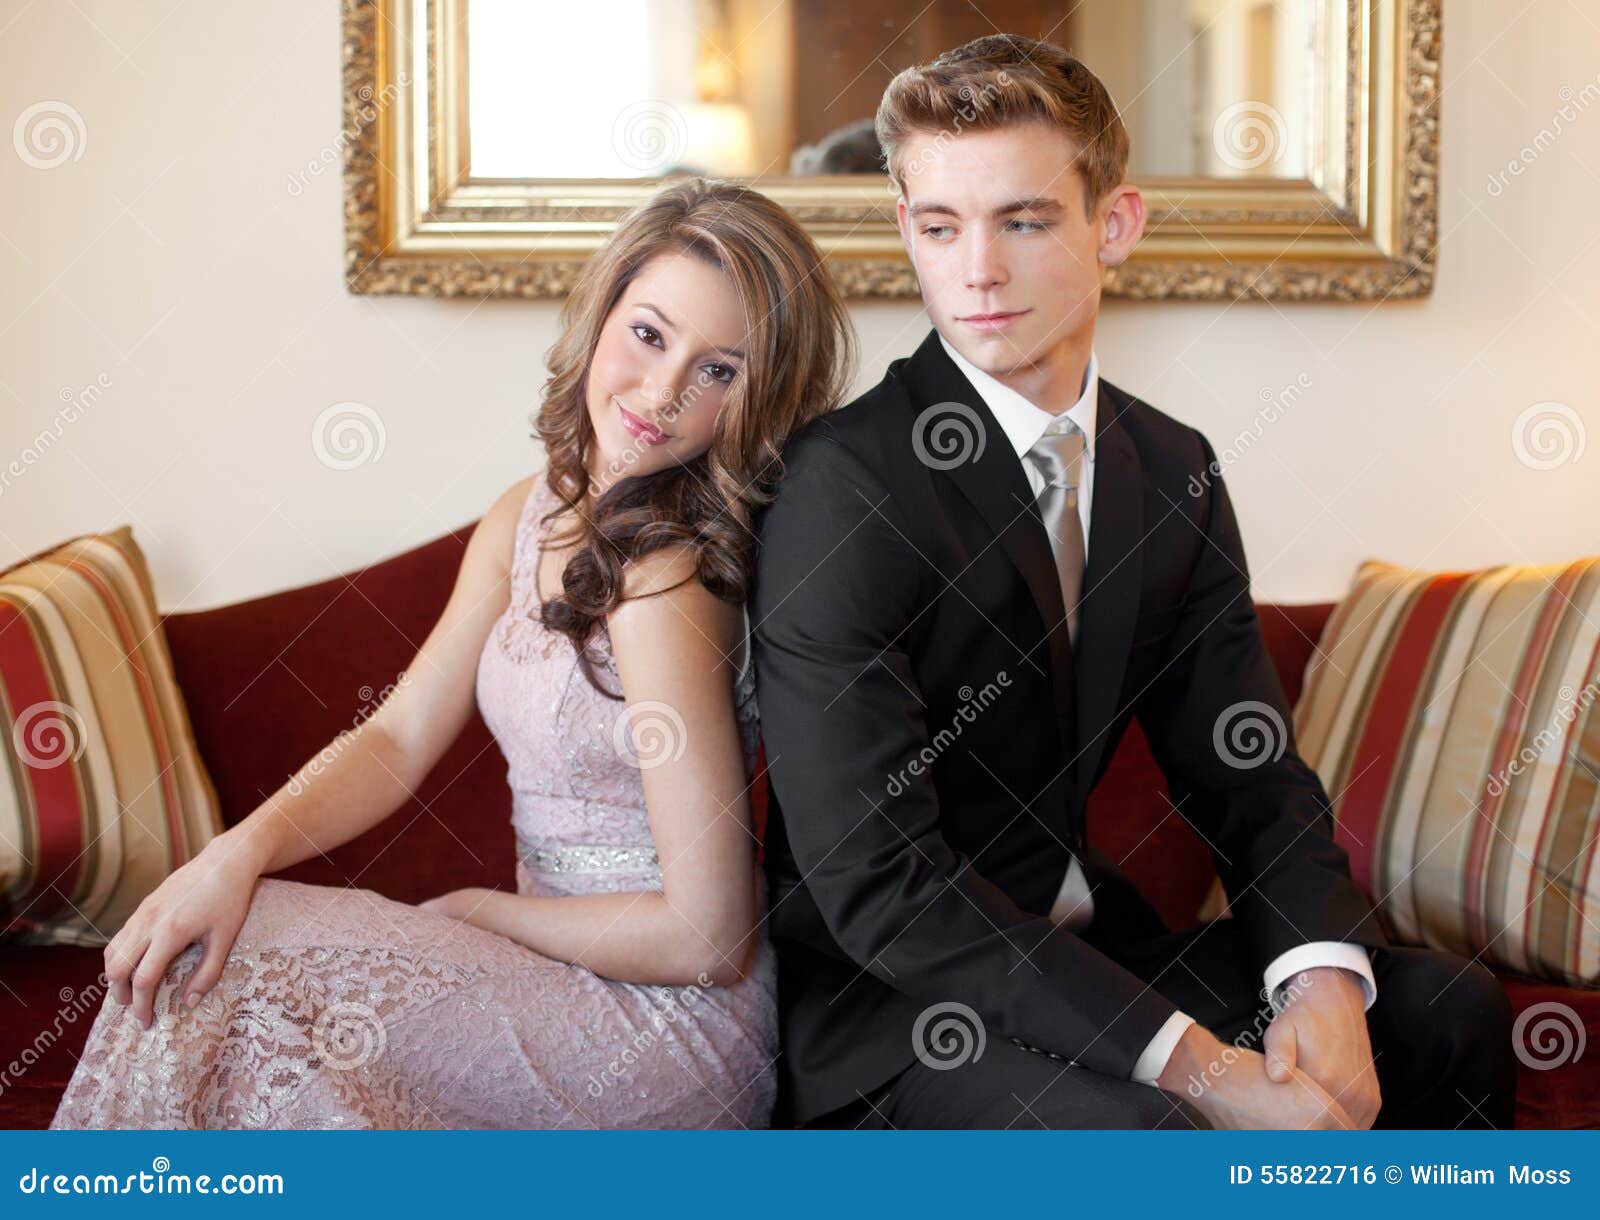 Young Couple Play Dress Up